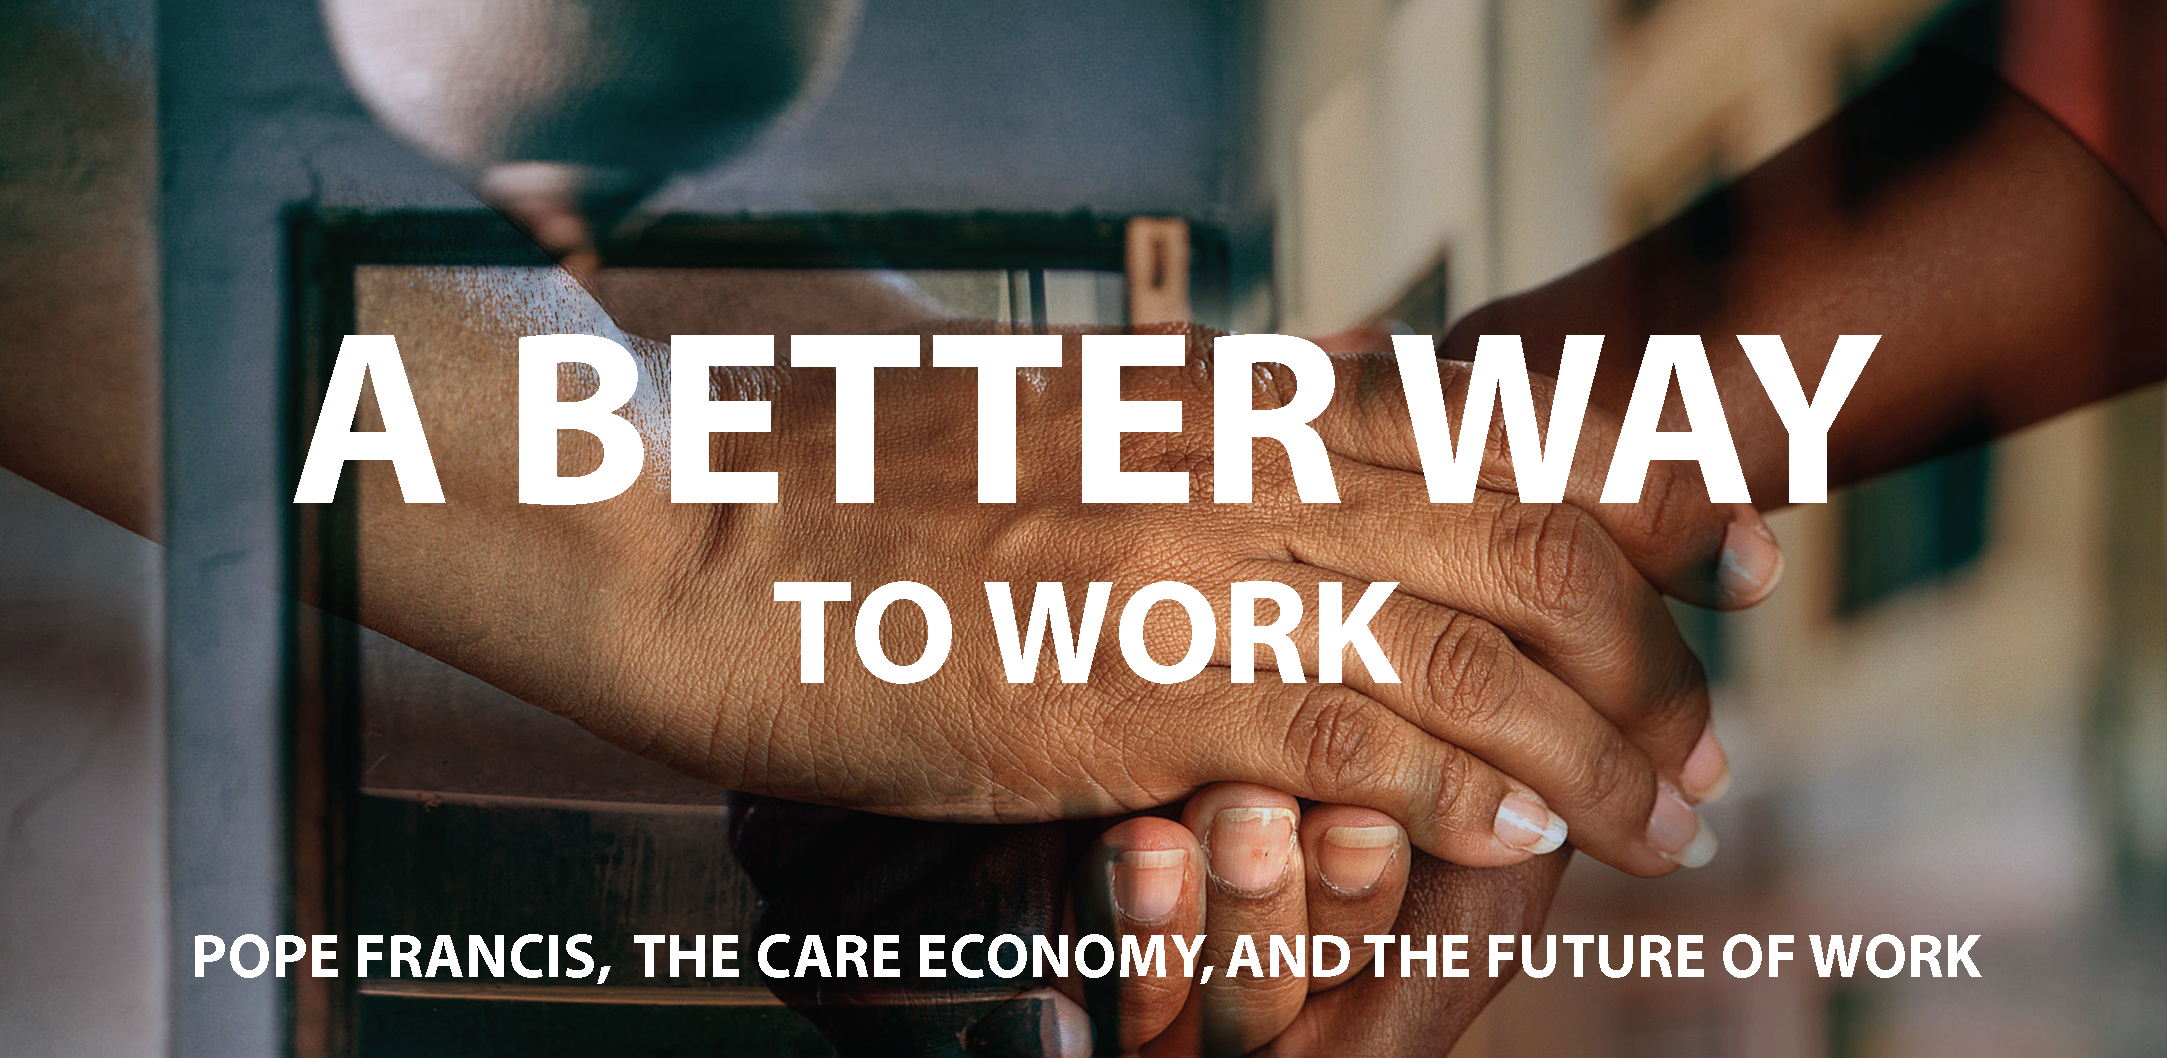 A Better Way to Work: Pope Francis, the Care Economy, and the Future of Work